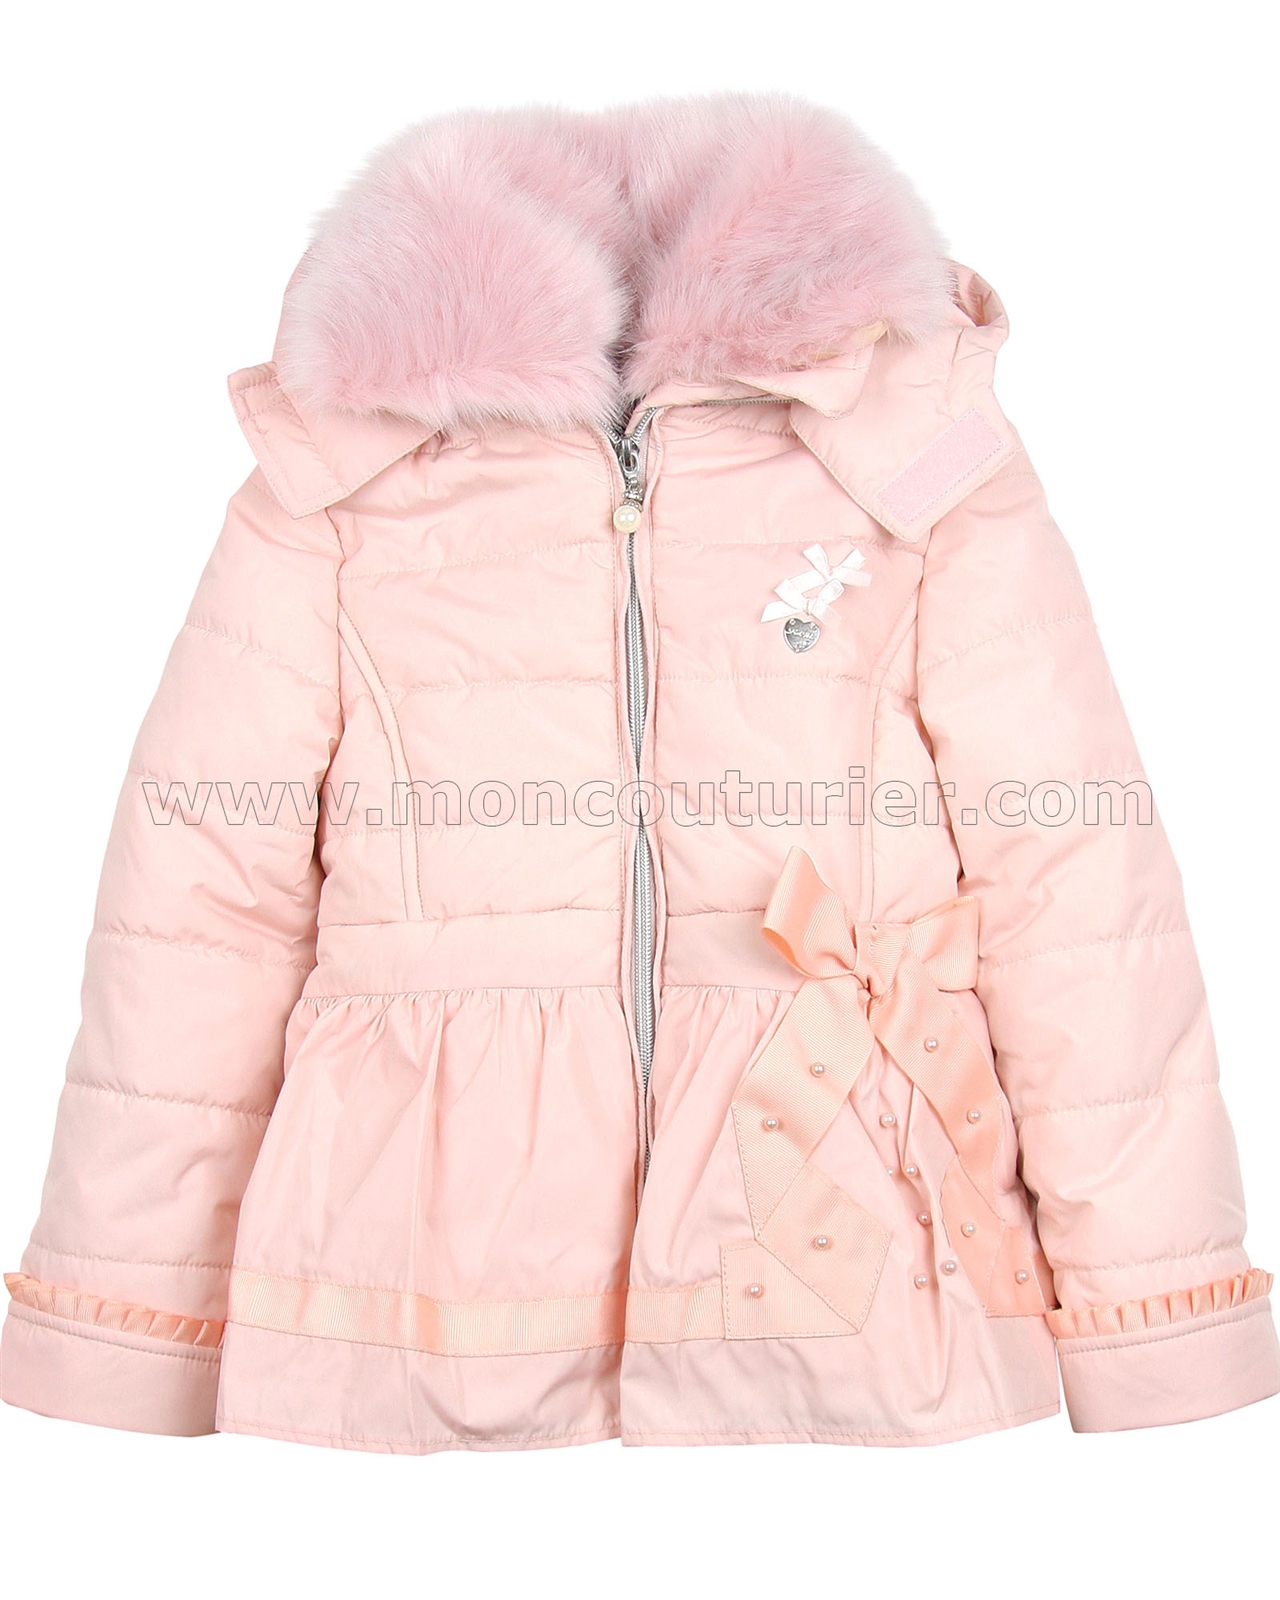 Sizes 3-12 Le Chic Girls Puffer Coat with Ruffles Peach